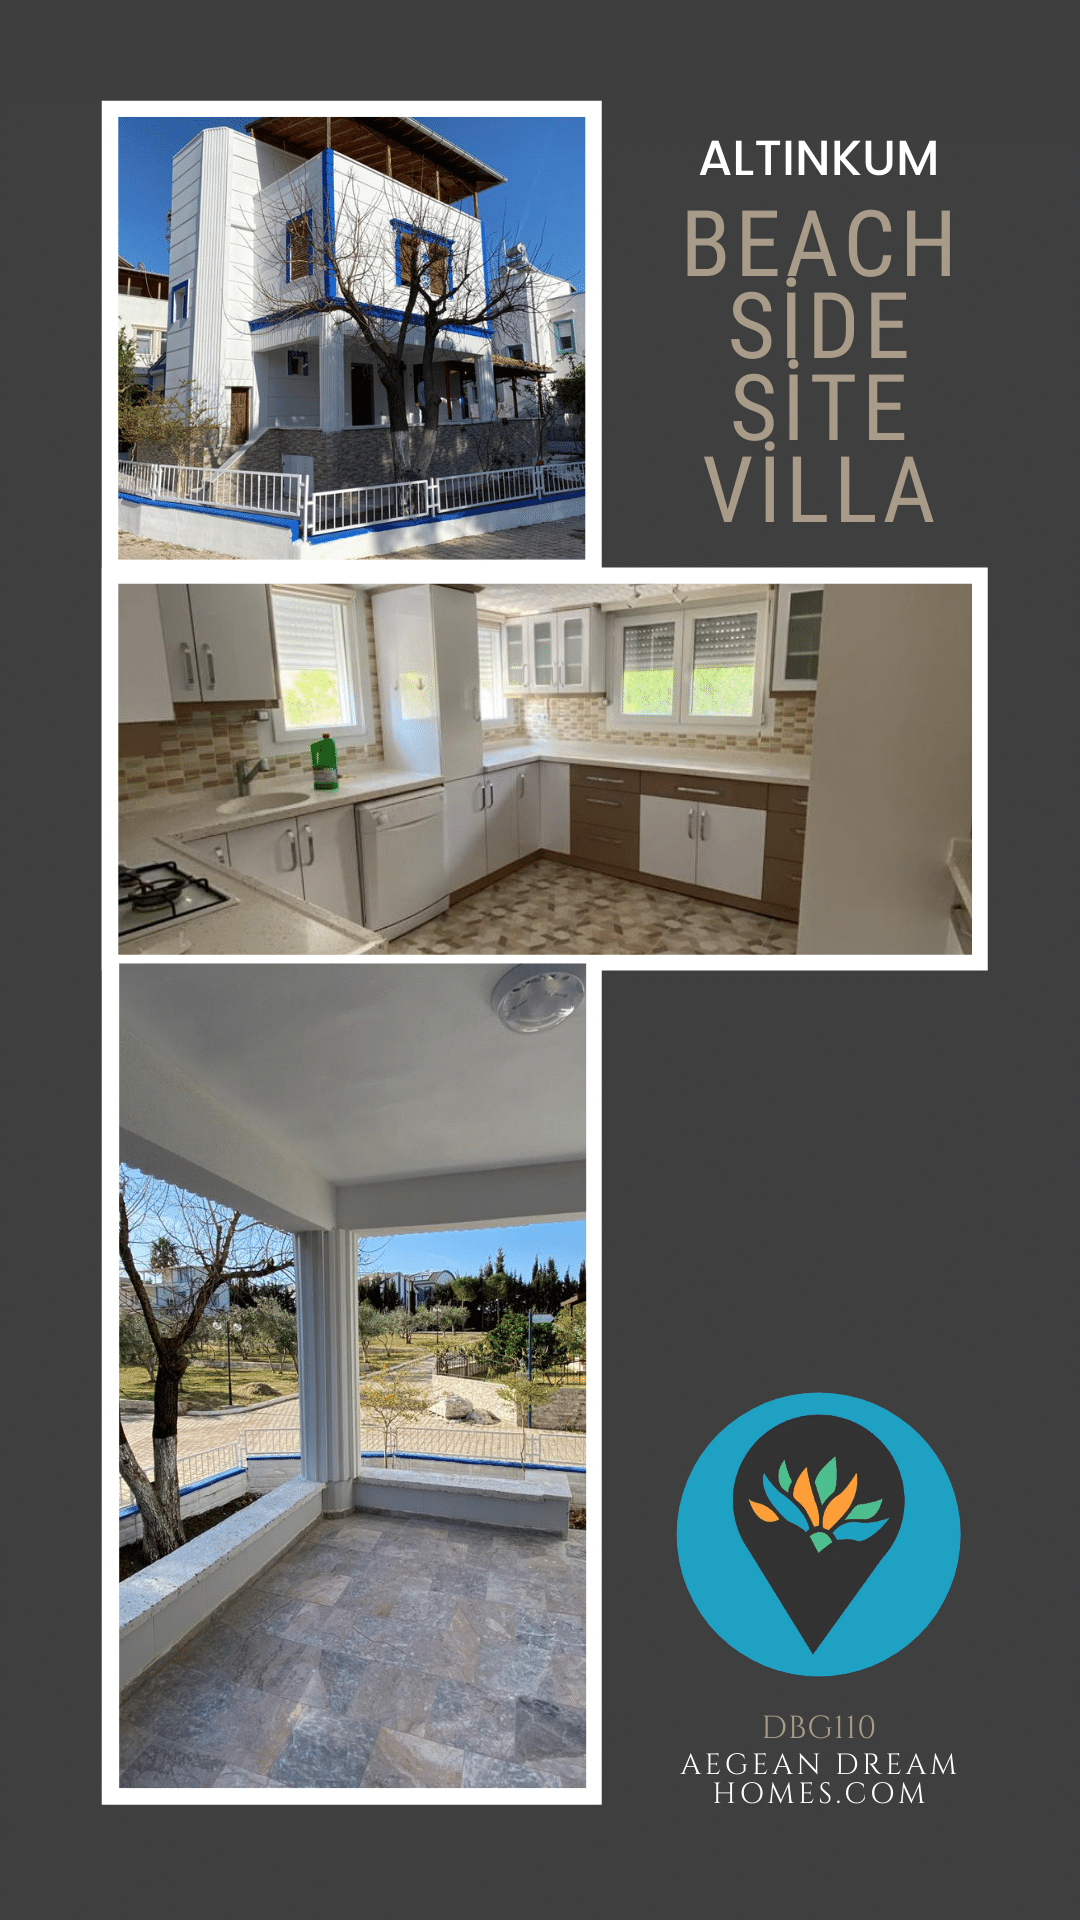 Featured property header for DBG110. Text overlay reads: Altinkum Beach Side Site Villa For Sale Picture shows the renovated property for sale with. Plus Aegean Dream Homes logo